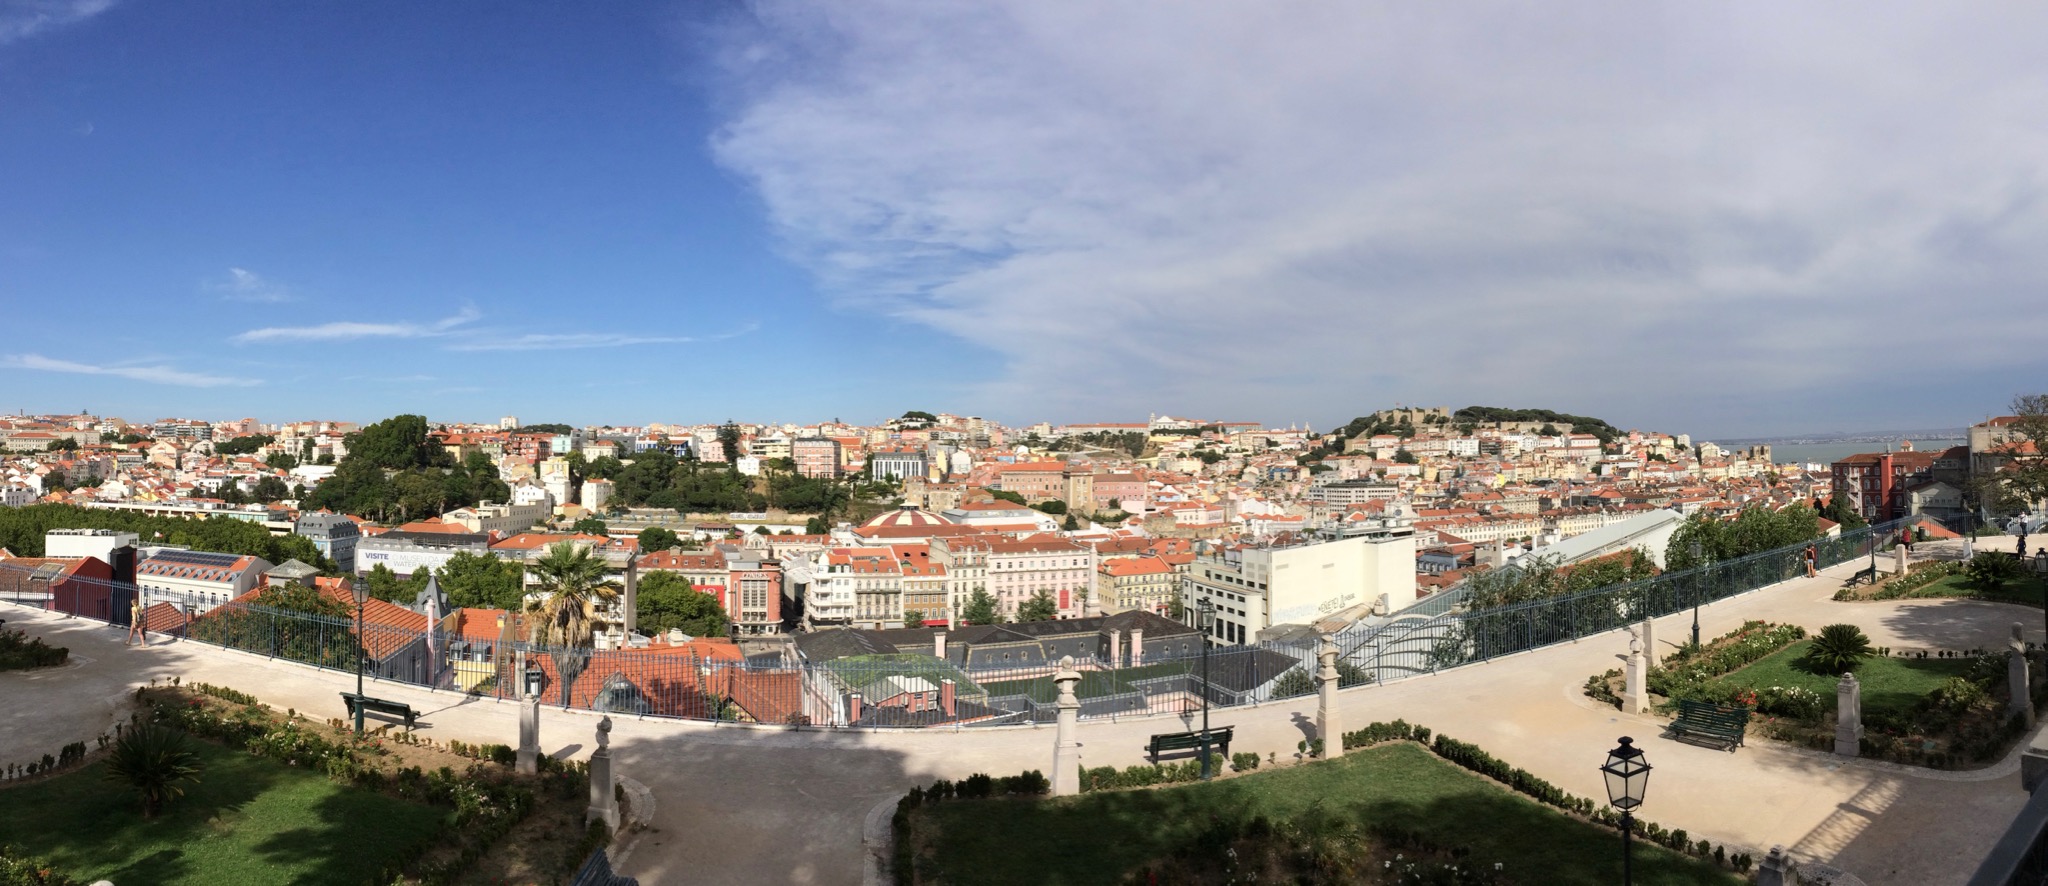 Photo 2 of 86 from the album Highlights Lisbon 2015.